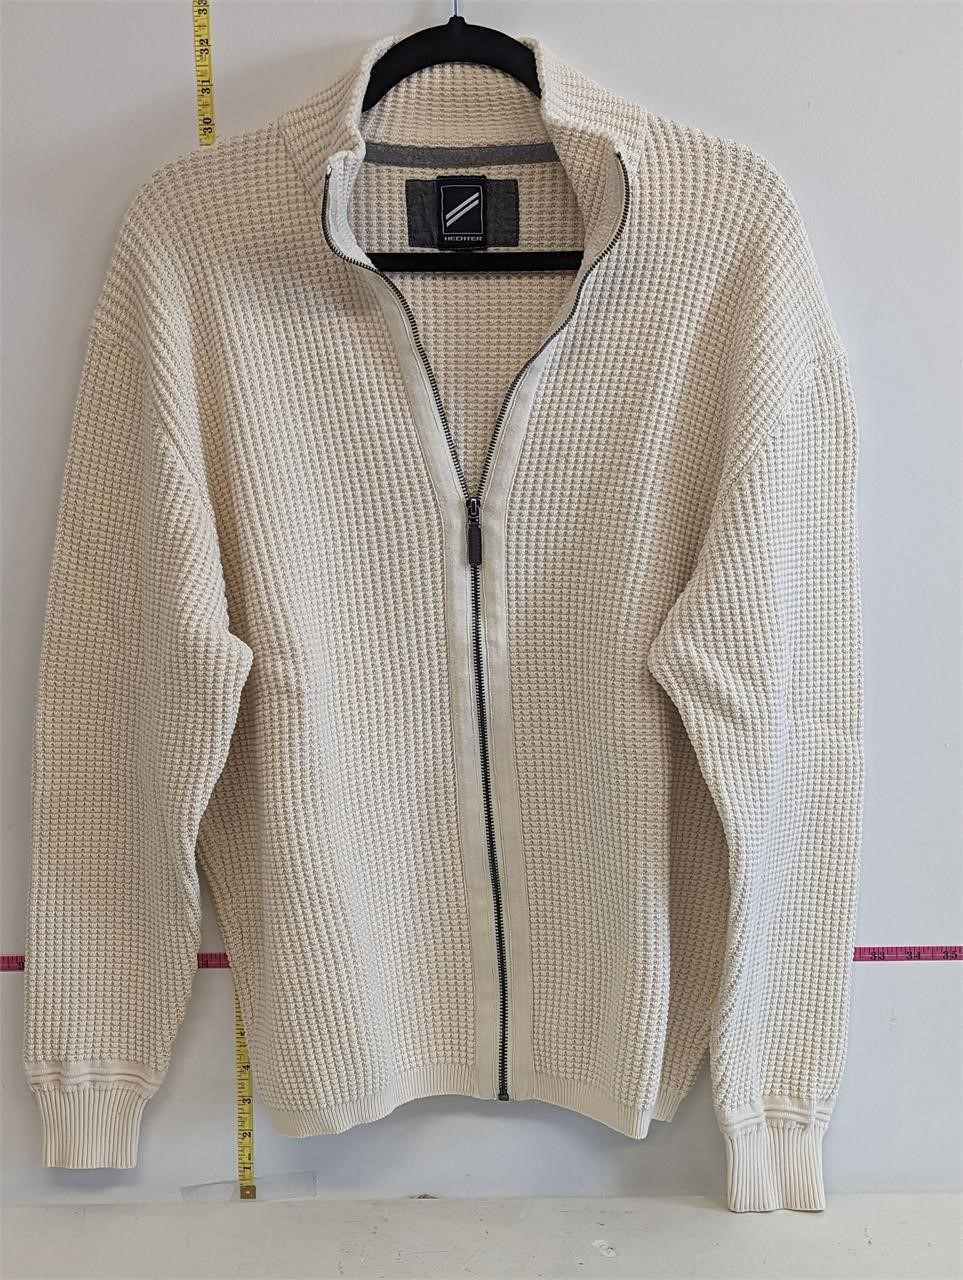 Hechters Cream Coloured Heavy Sweater (XL)